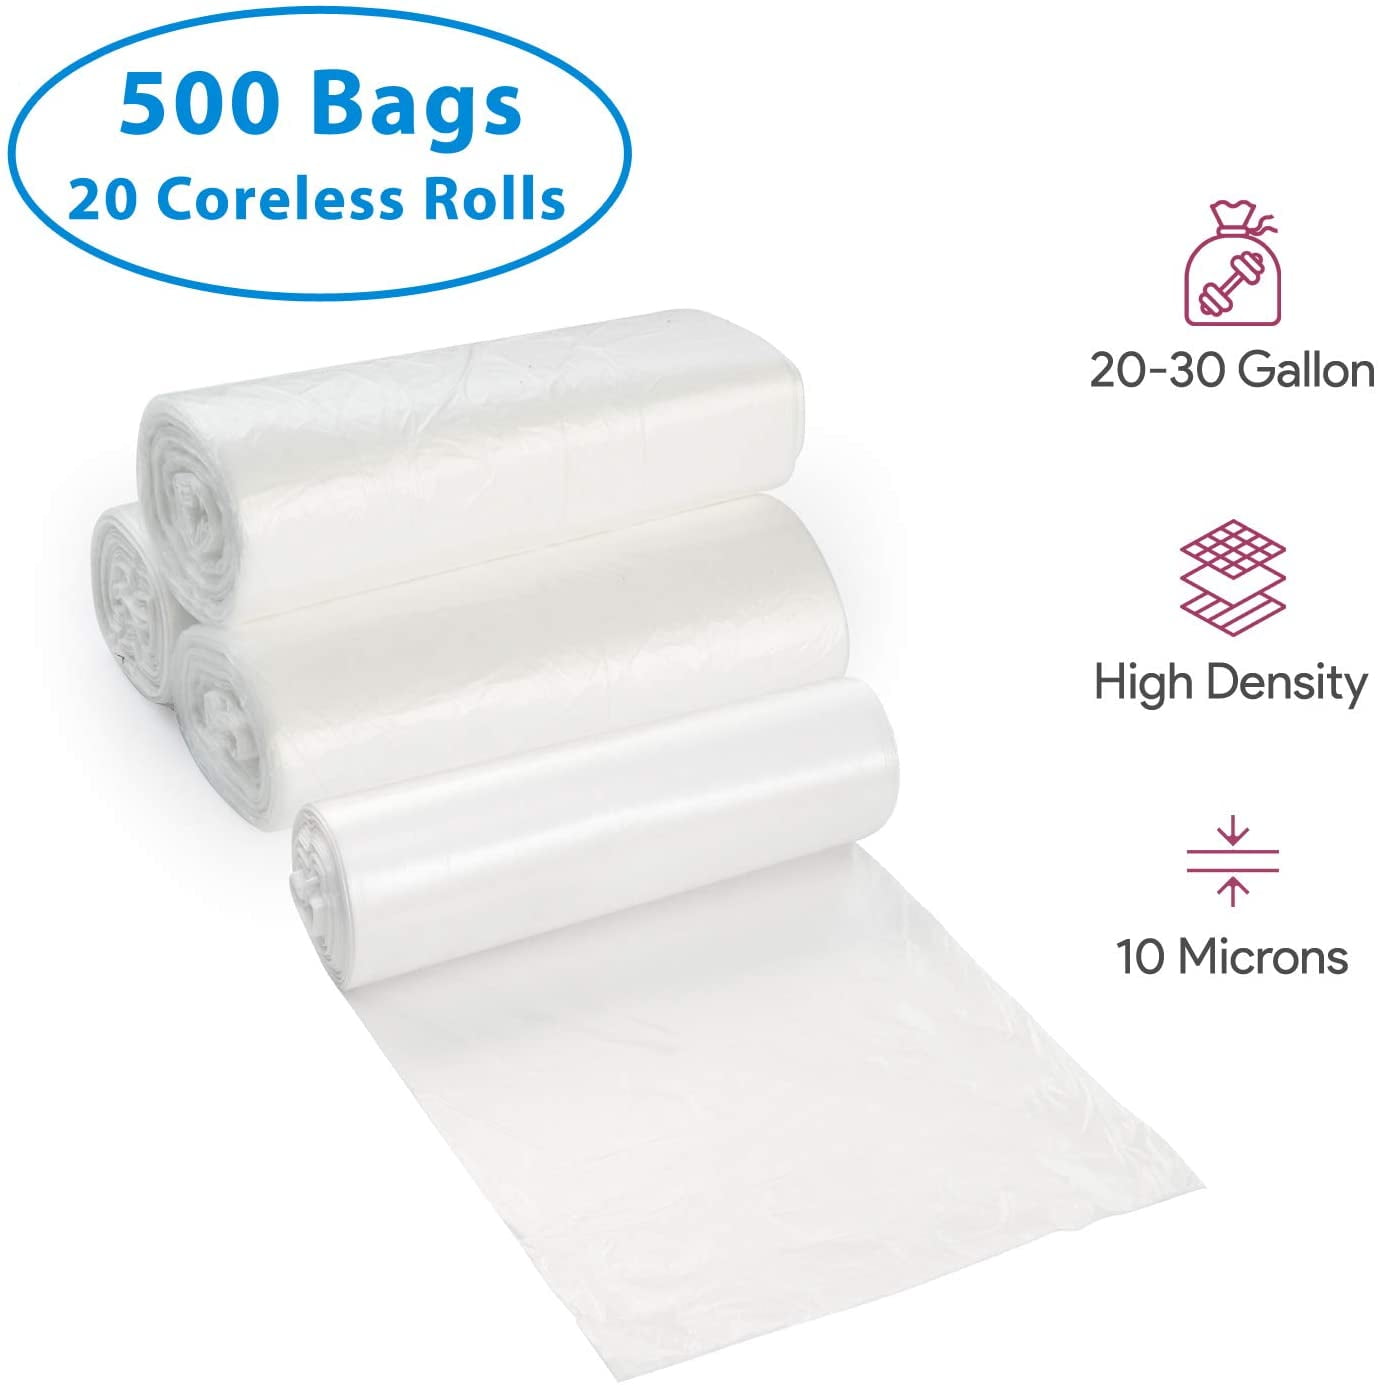 Aluf Plastics 20-30 Gallon Trash Can Liners (100 Count) - 30 x 36 - Thick  1.5 MIL Equivalent Black Trash Bags for Bathroom, Kitchen, Office,  Indtrial, Commercial, Recycling and More 